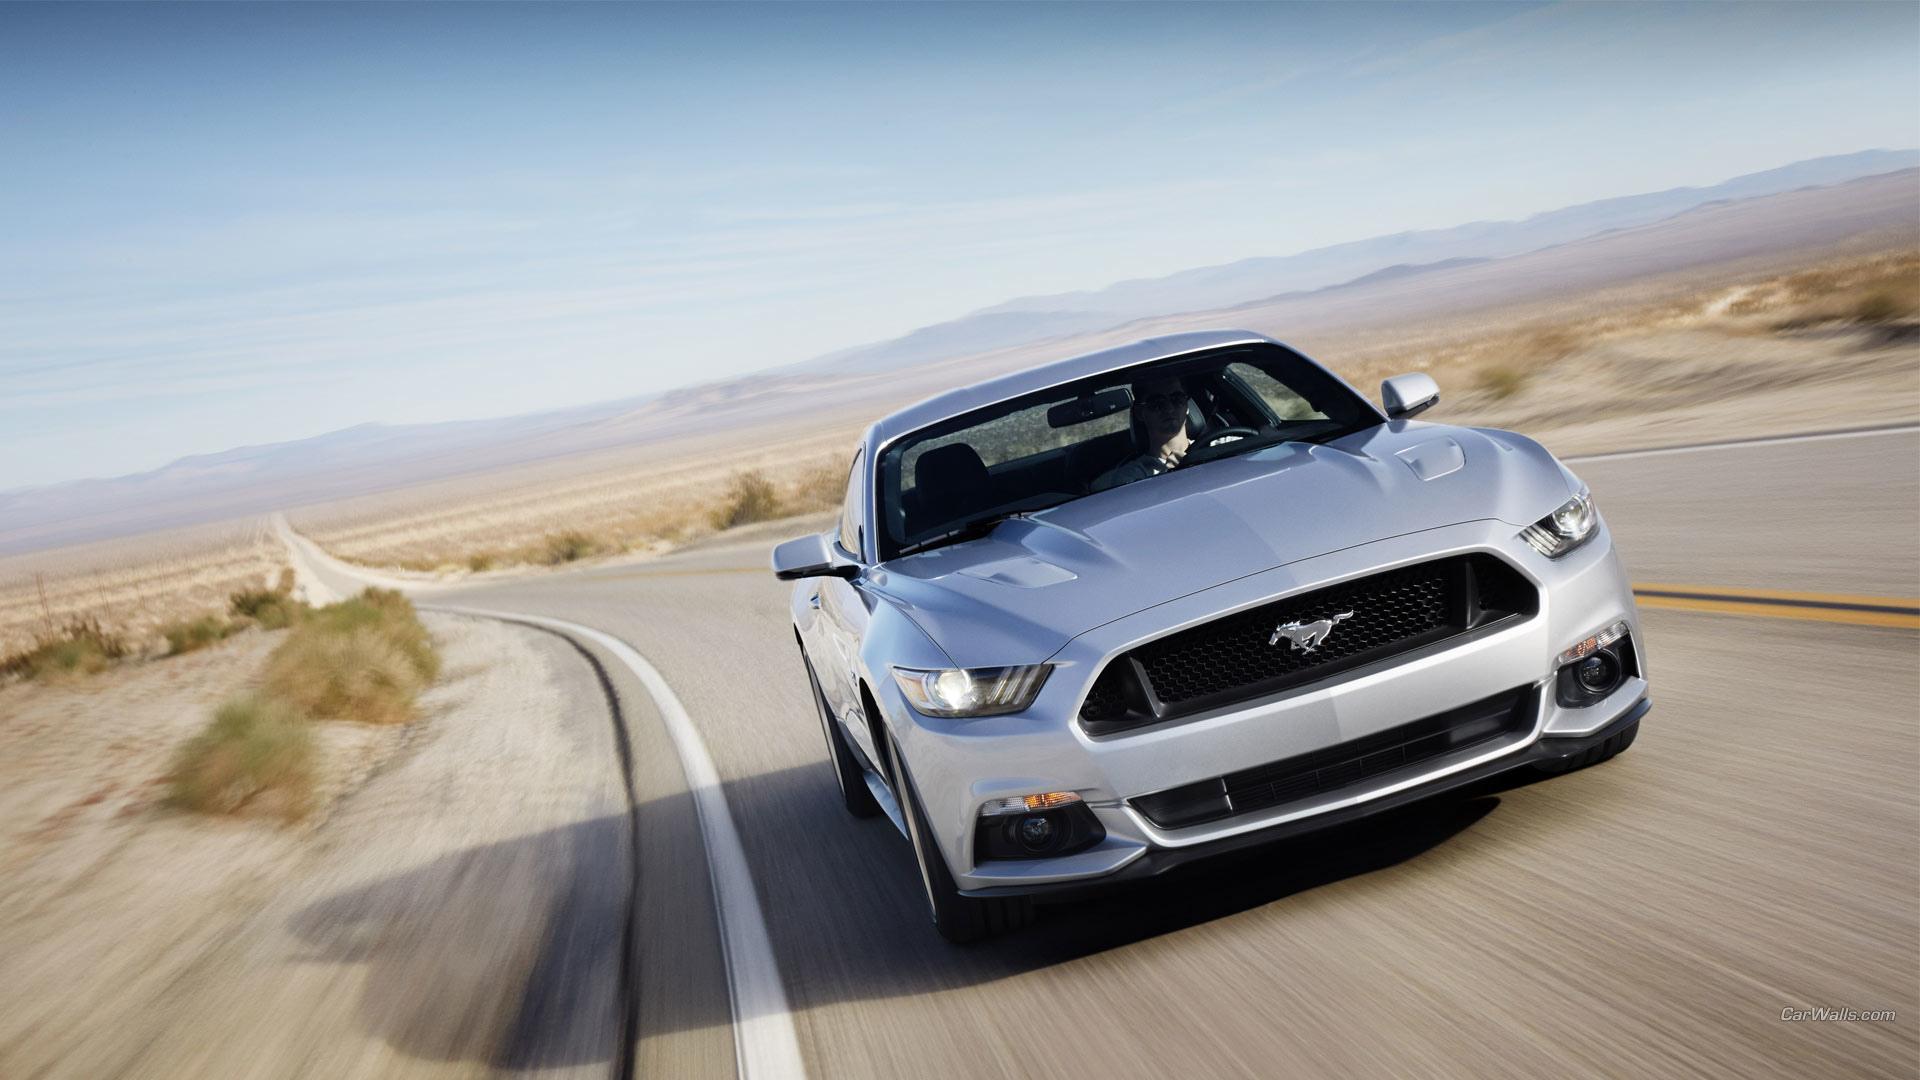 2015 Ford Mustang GT wallpapers HD quality